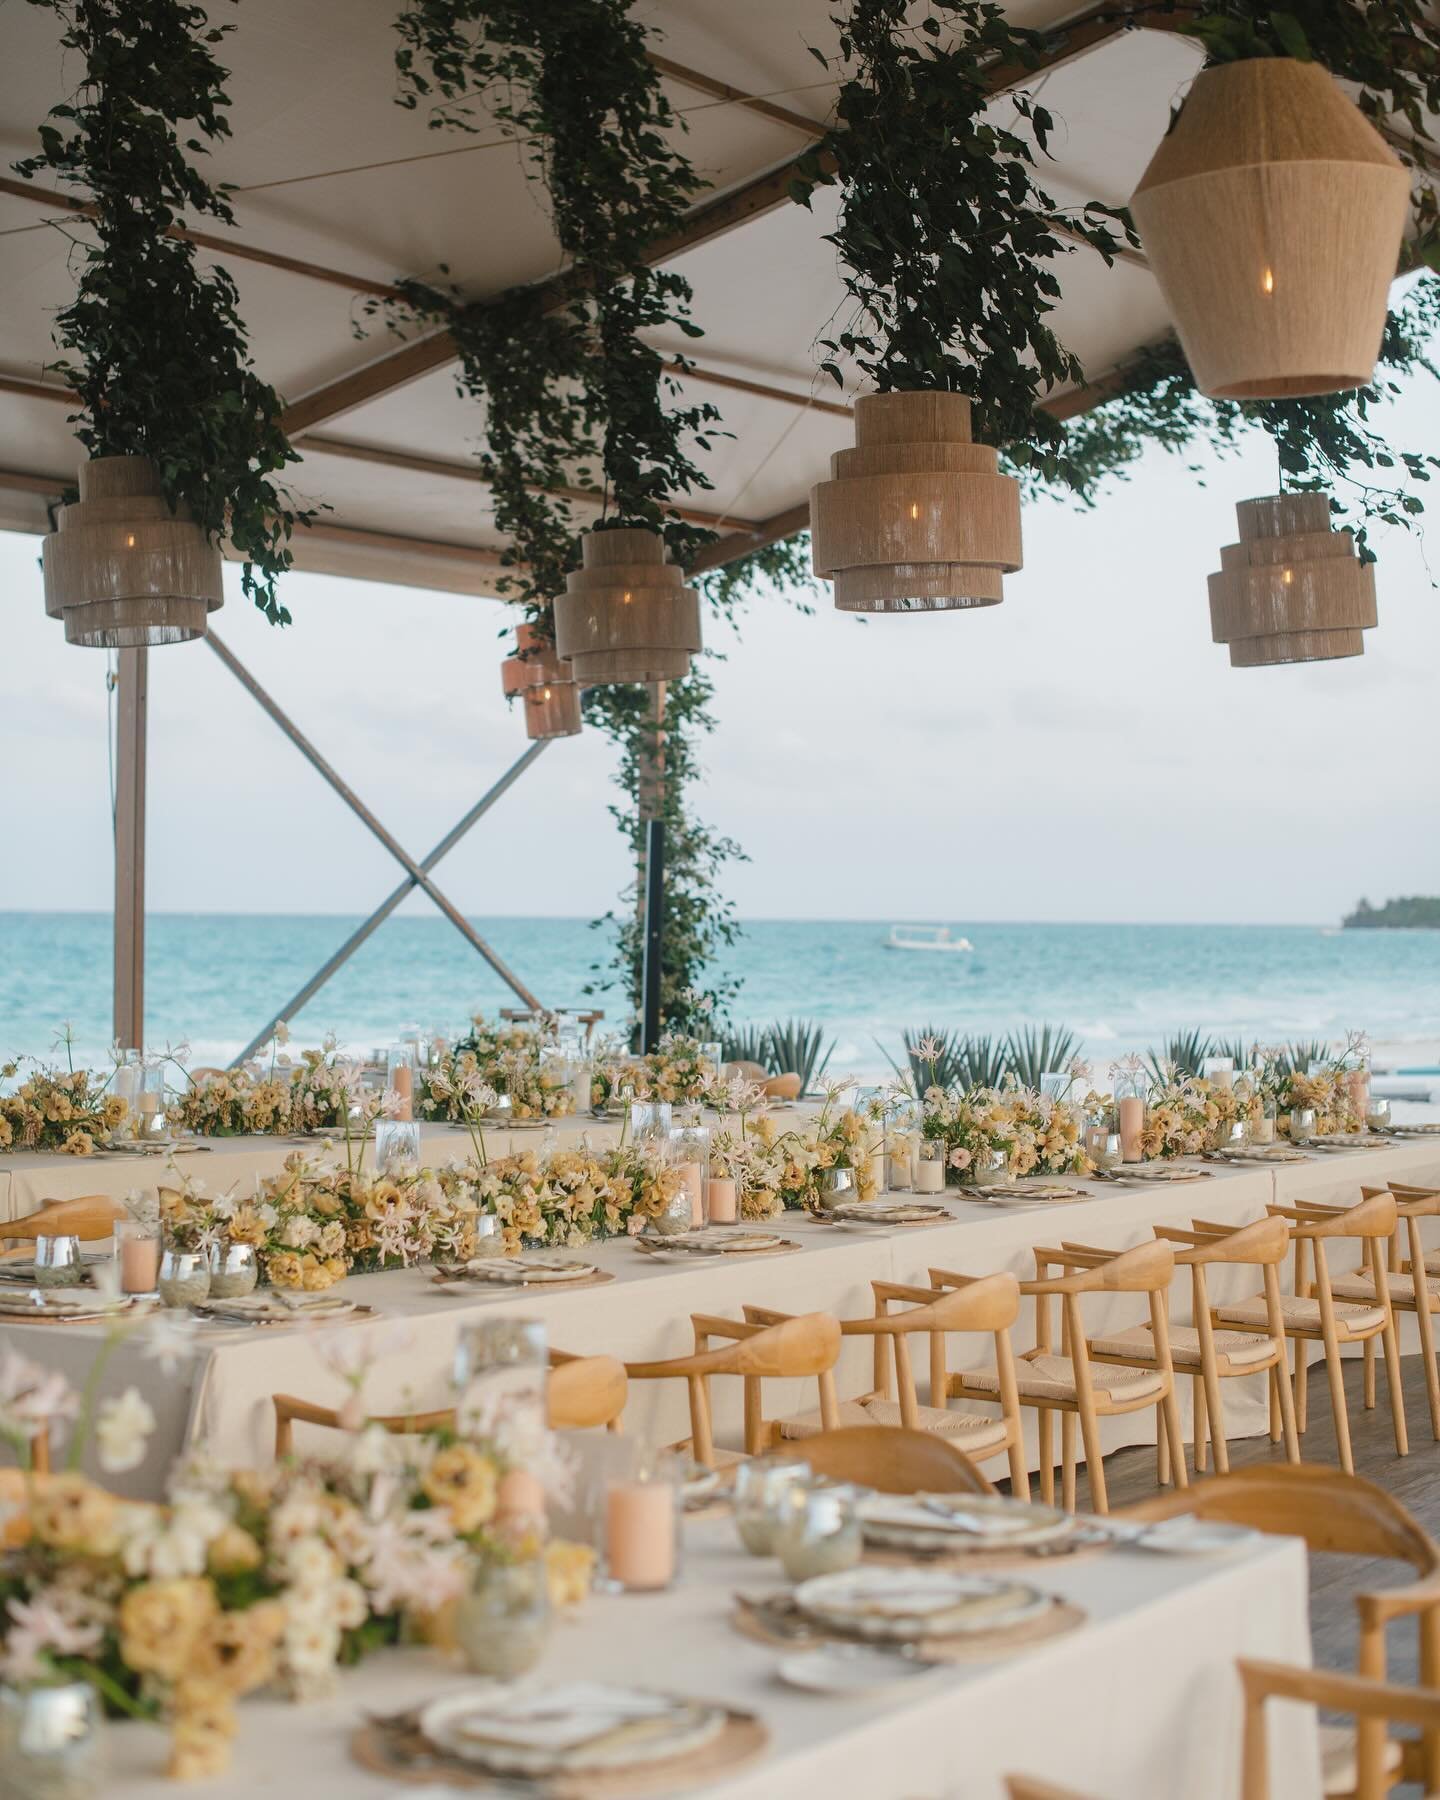 Gorgeous reception details from the Riviera Maya wedding of @alexandracooper and Matt Kaplan. Seen in @vogueweddings. 

Images edited using the KMP Day to Day presets from @hellodvlop. 

Planning: @bashplease 
Florals: @sirenfloralco 
Hair: @cherilyn